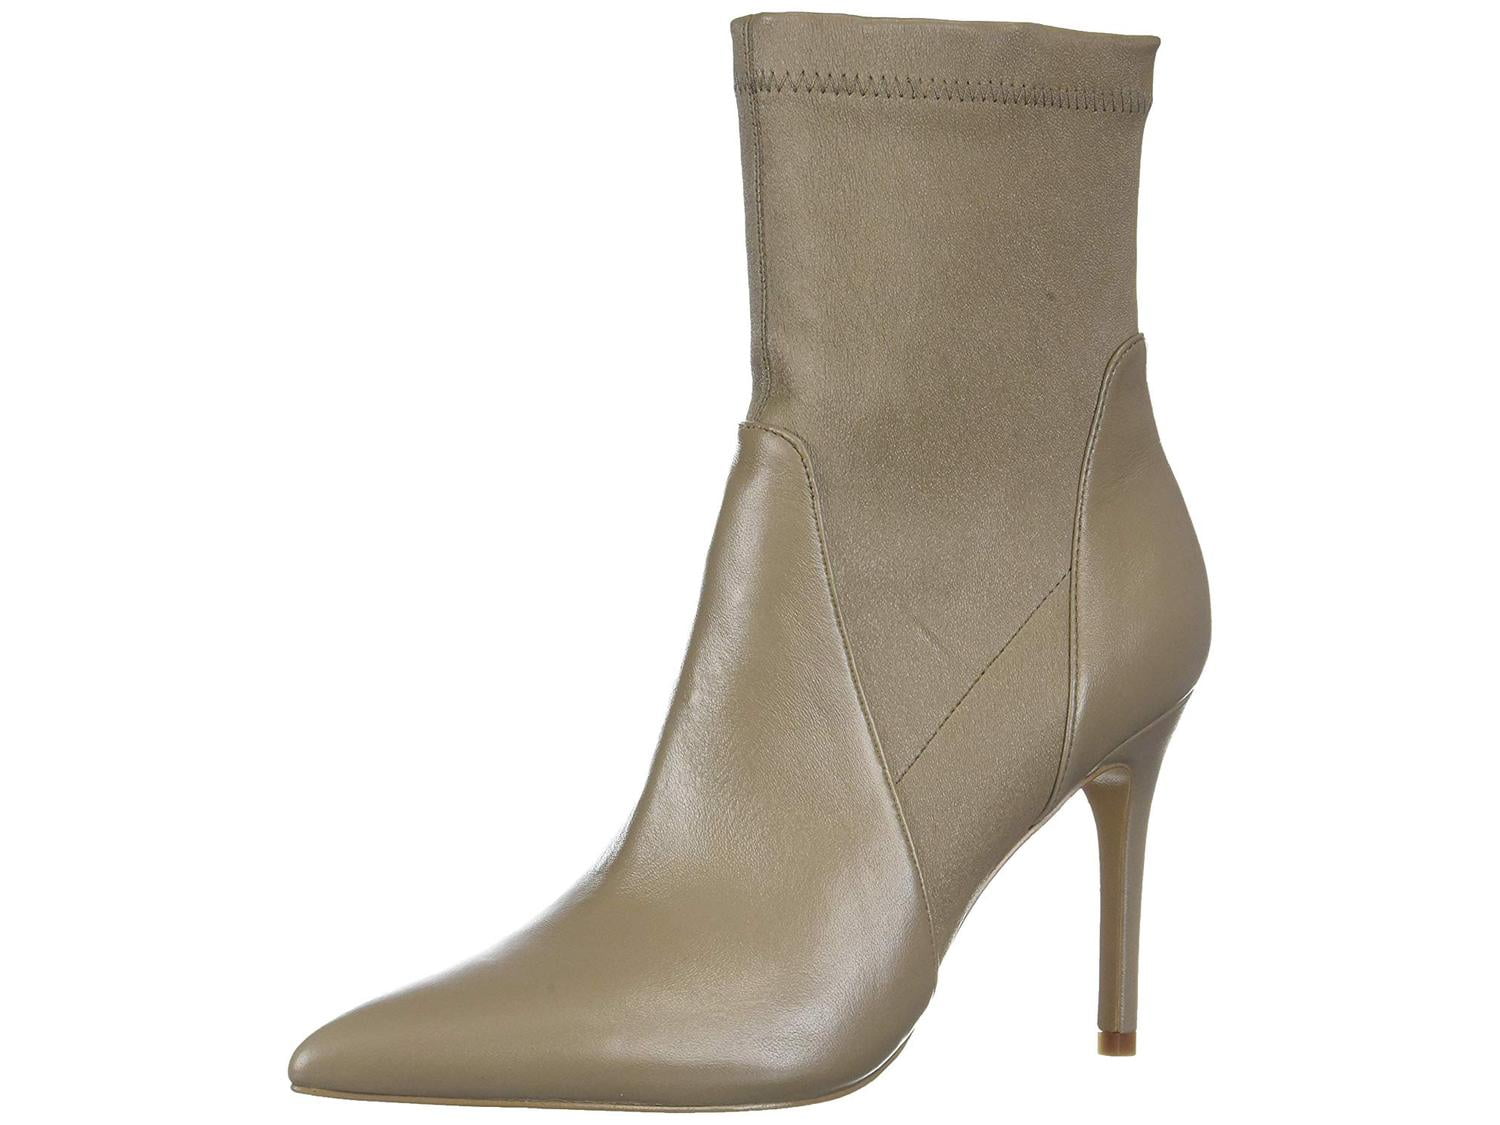 Charles David - Charles David Women's Laurent Ankle Boot, Taupe, Size 8 ...